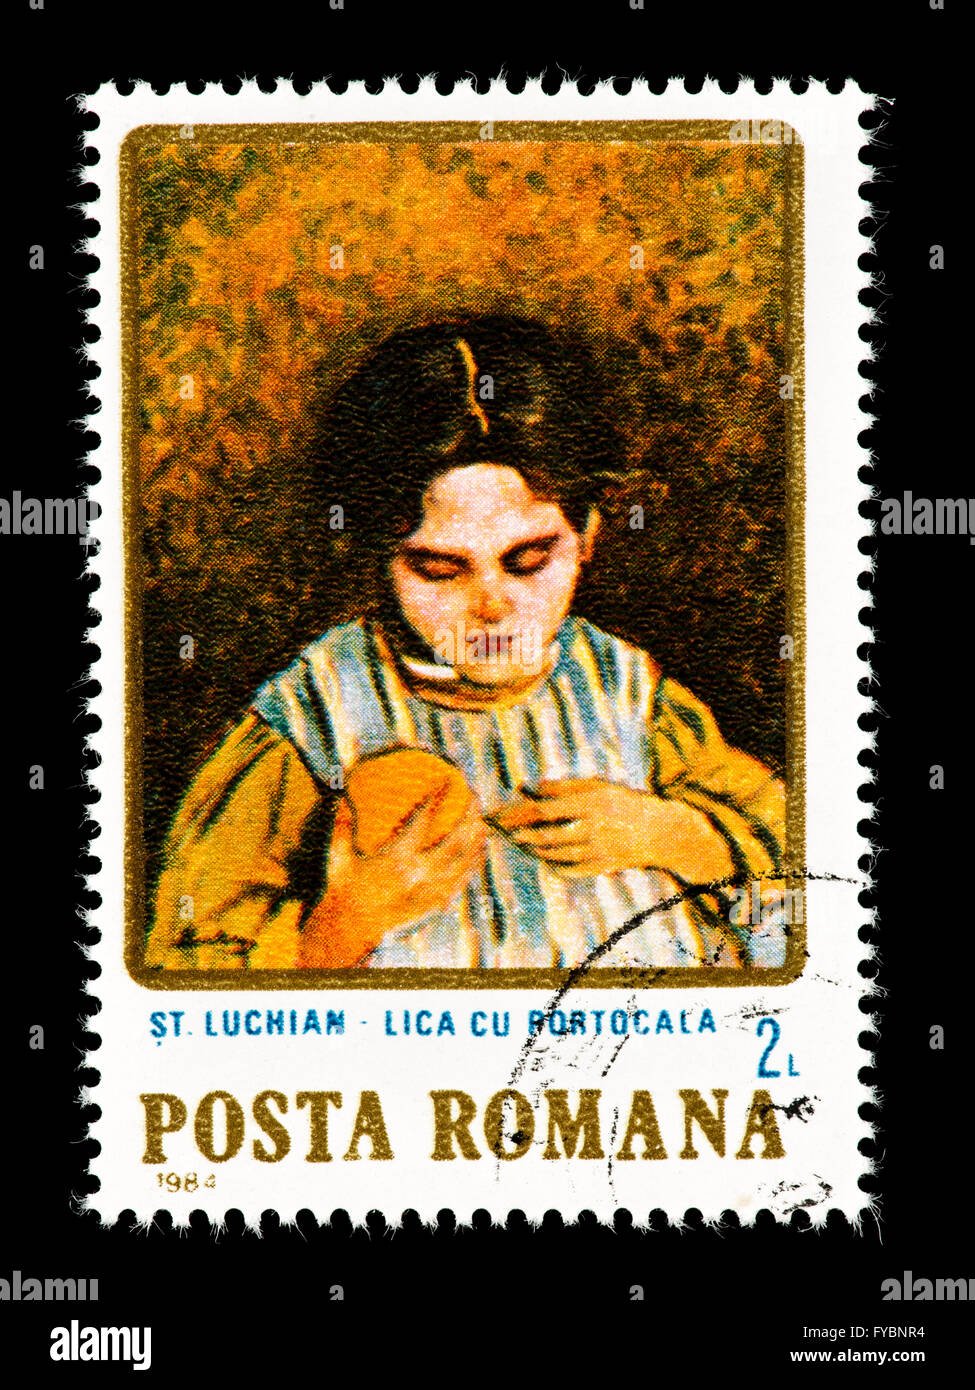 Postage stamp from Romania depicting the S. Ludhiana painting Girl with Orange. Stock Photo